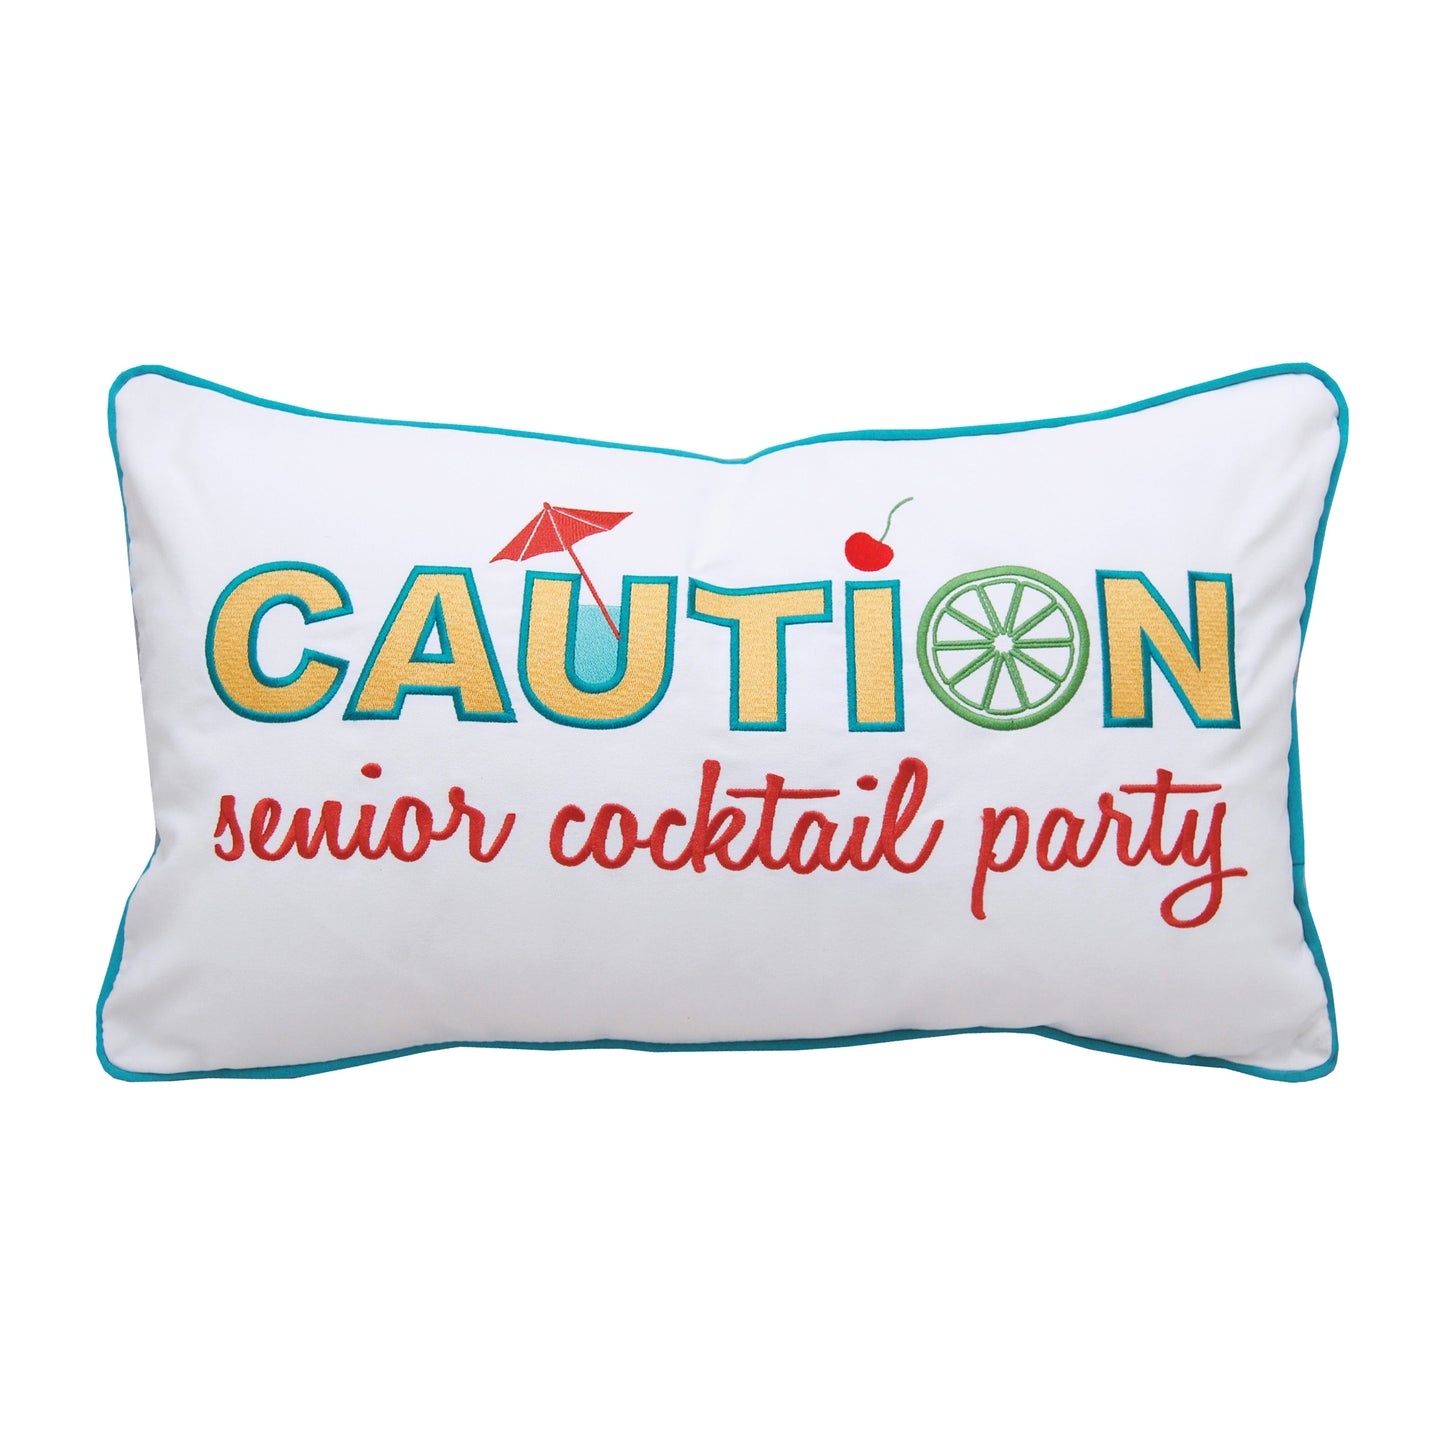 The sentiment "Caution Senior Cocktail Party" embroidered in two various fonts with fun coastal icons - beach umbrella, cherry, and lime slice.